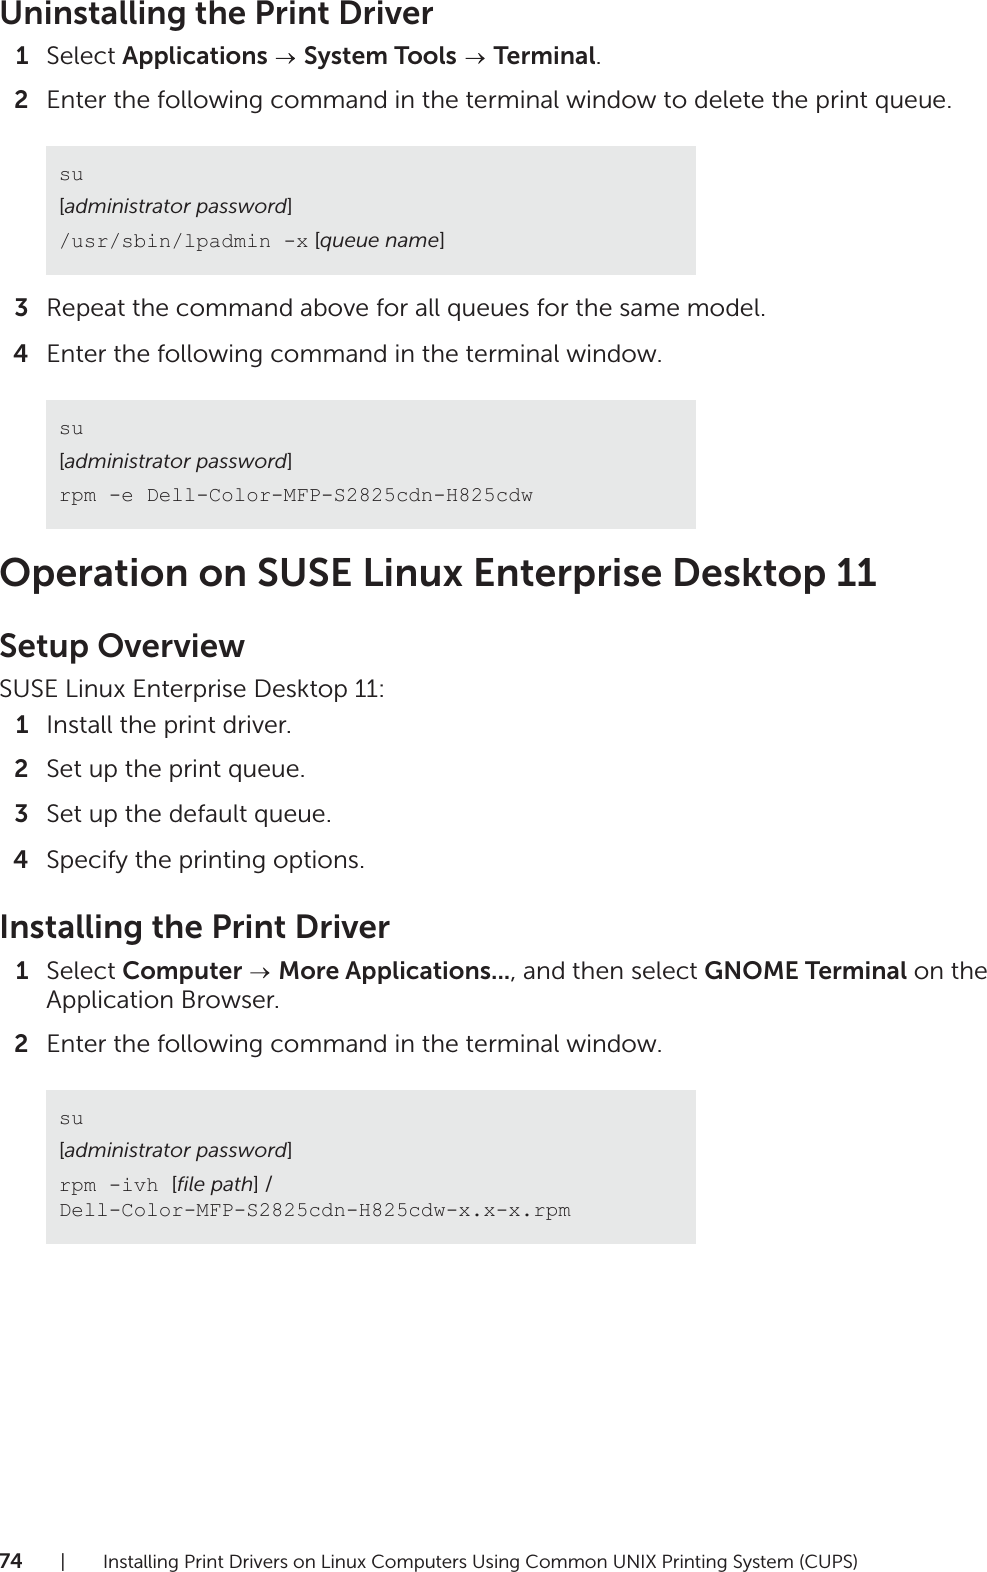 74| Installing Print Drivers on Linux Computers Using Common UNIX Printing System (CUPS)Uninstalling the Print Driver1Select Applications   System Tools  Terminal.2Enter the following command in the terminal window to delete the print queue.3Repeat the command above for all queues for the same model.4Enter the following command in the terminal window.Operation on SUSE Linux Enterprise Desktop 11Setup OverviewSUSE Linux Enterprise Desktop 11:1Install the print driver.2Set up the print queue.3Set up the default queue.4Specify the printing options.Installing the Print Driver1Select Computer   More Applications..., and then select GNOME Terminal on the Application Browser.2Enter the following command in the terminal window.su[administrator password]/usr/sbin/lpadmin -x [queue name]su[administrator password]rpm -e Dell-Color-MFP-S2825cdn-H825cdwsu[administrator password]rpm -ivh [file path] / Dell-Color-MFP-S2825cdn-H825cdw-x.x-x.rpm